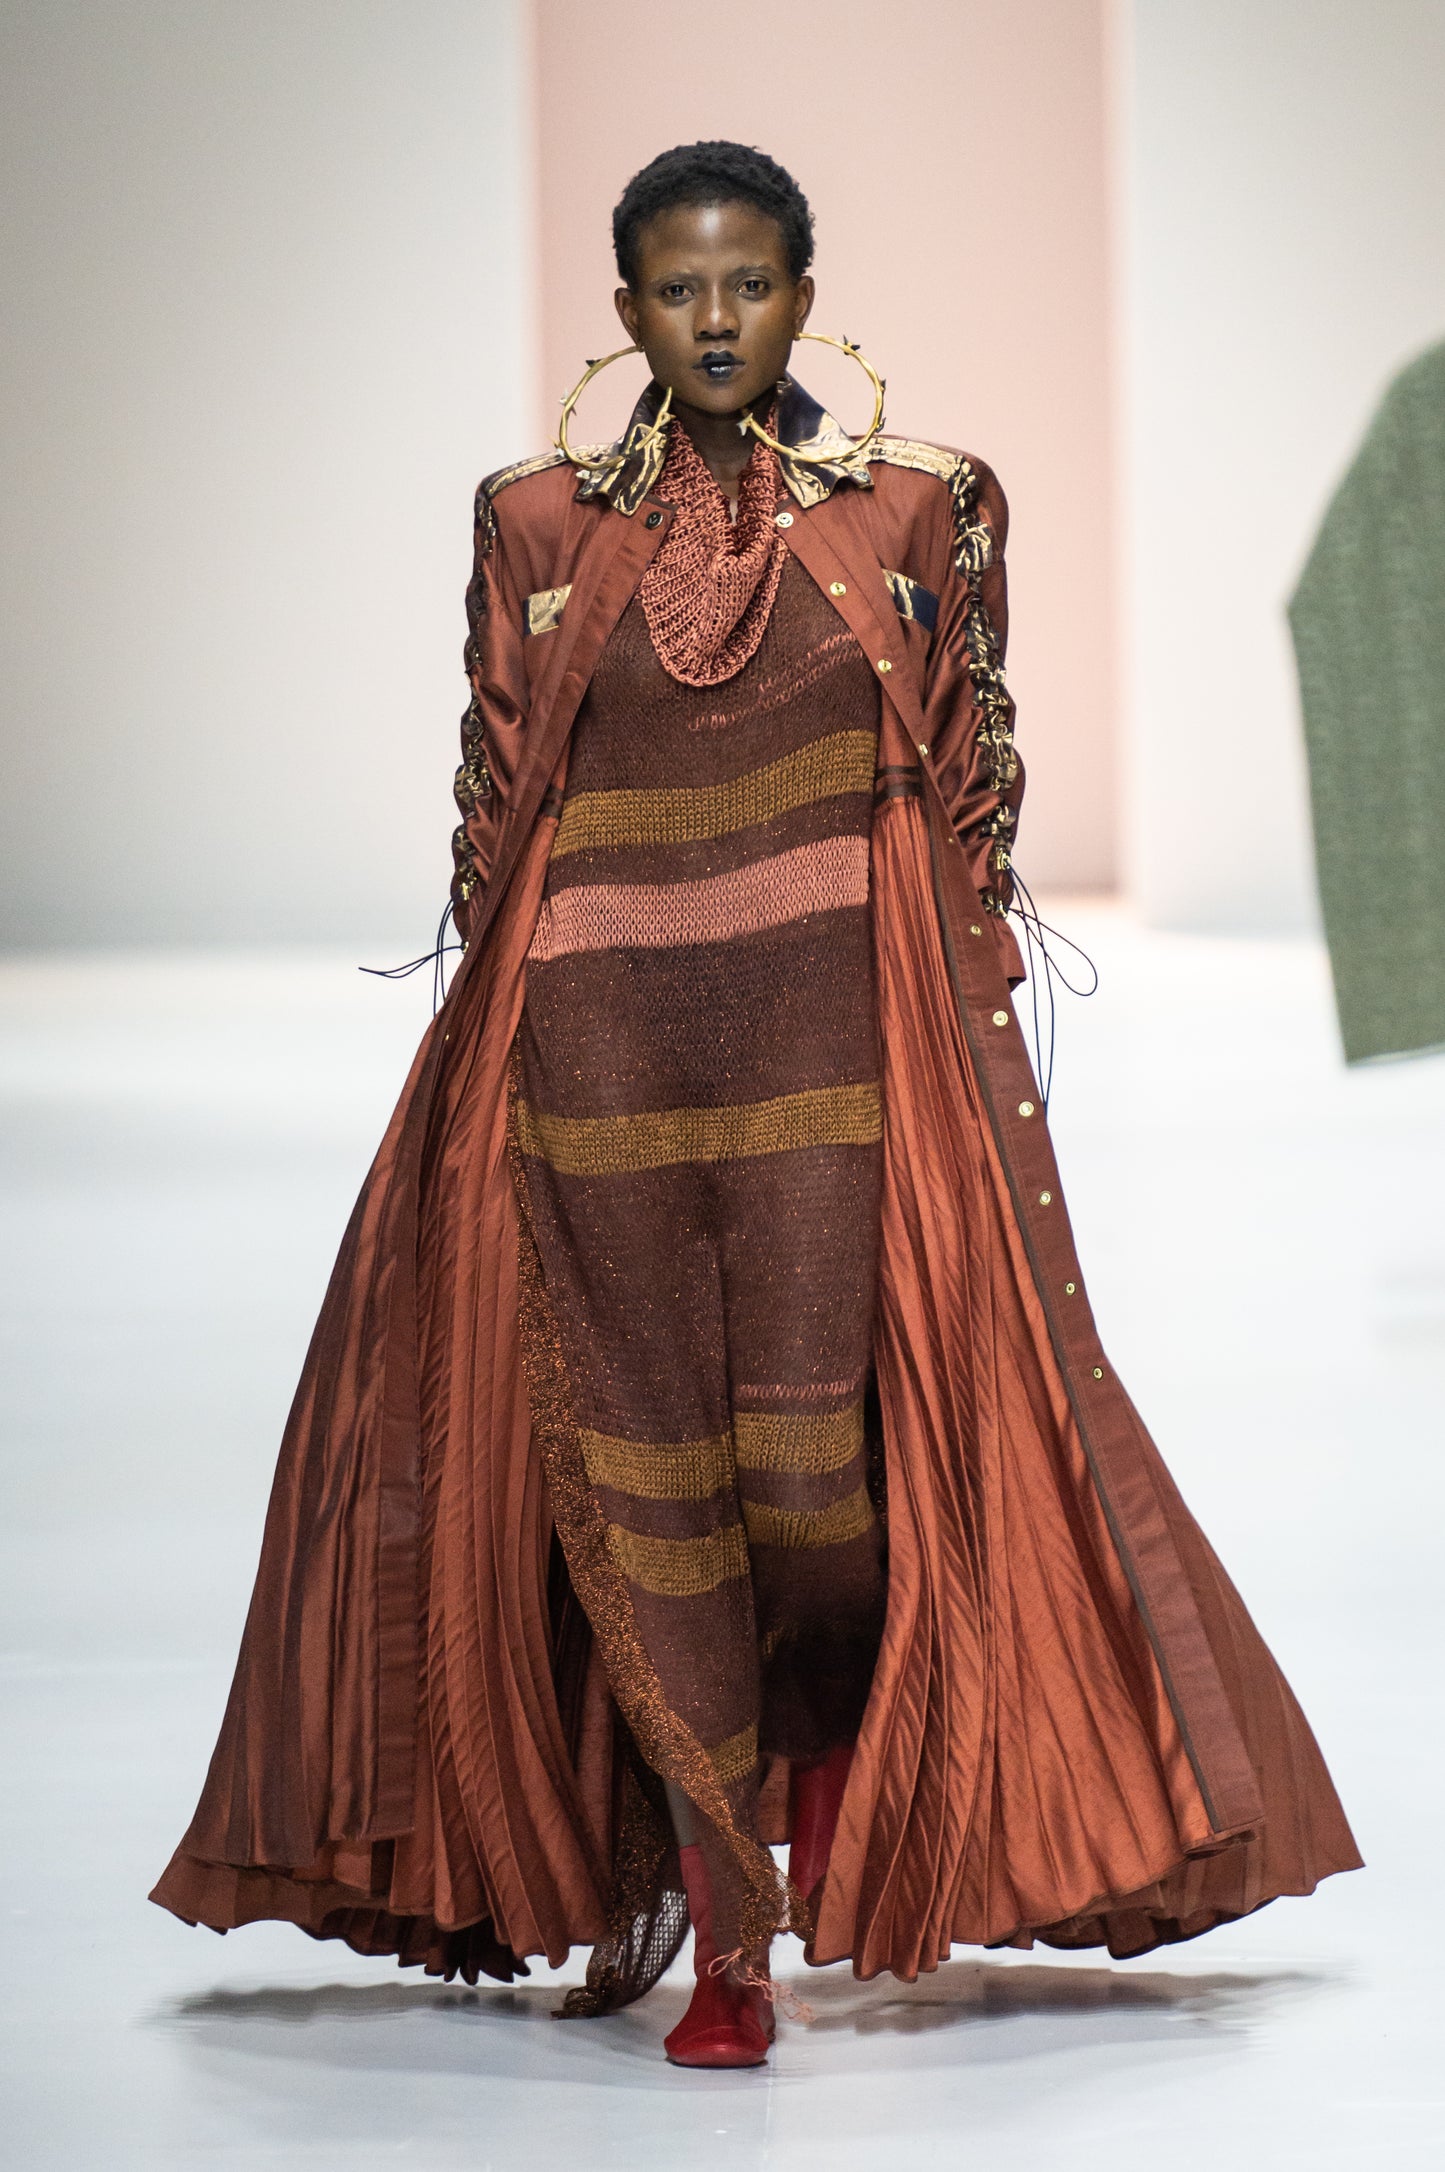 Copper Wool, Artisanal Knitted Dress in Kid-Mohair & Viscose